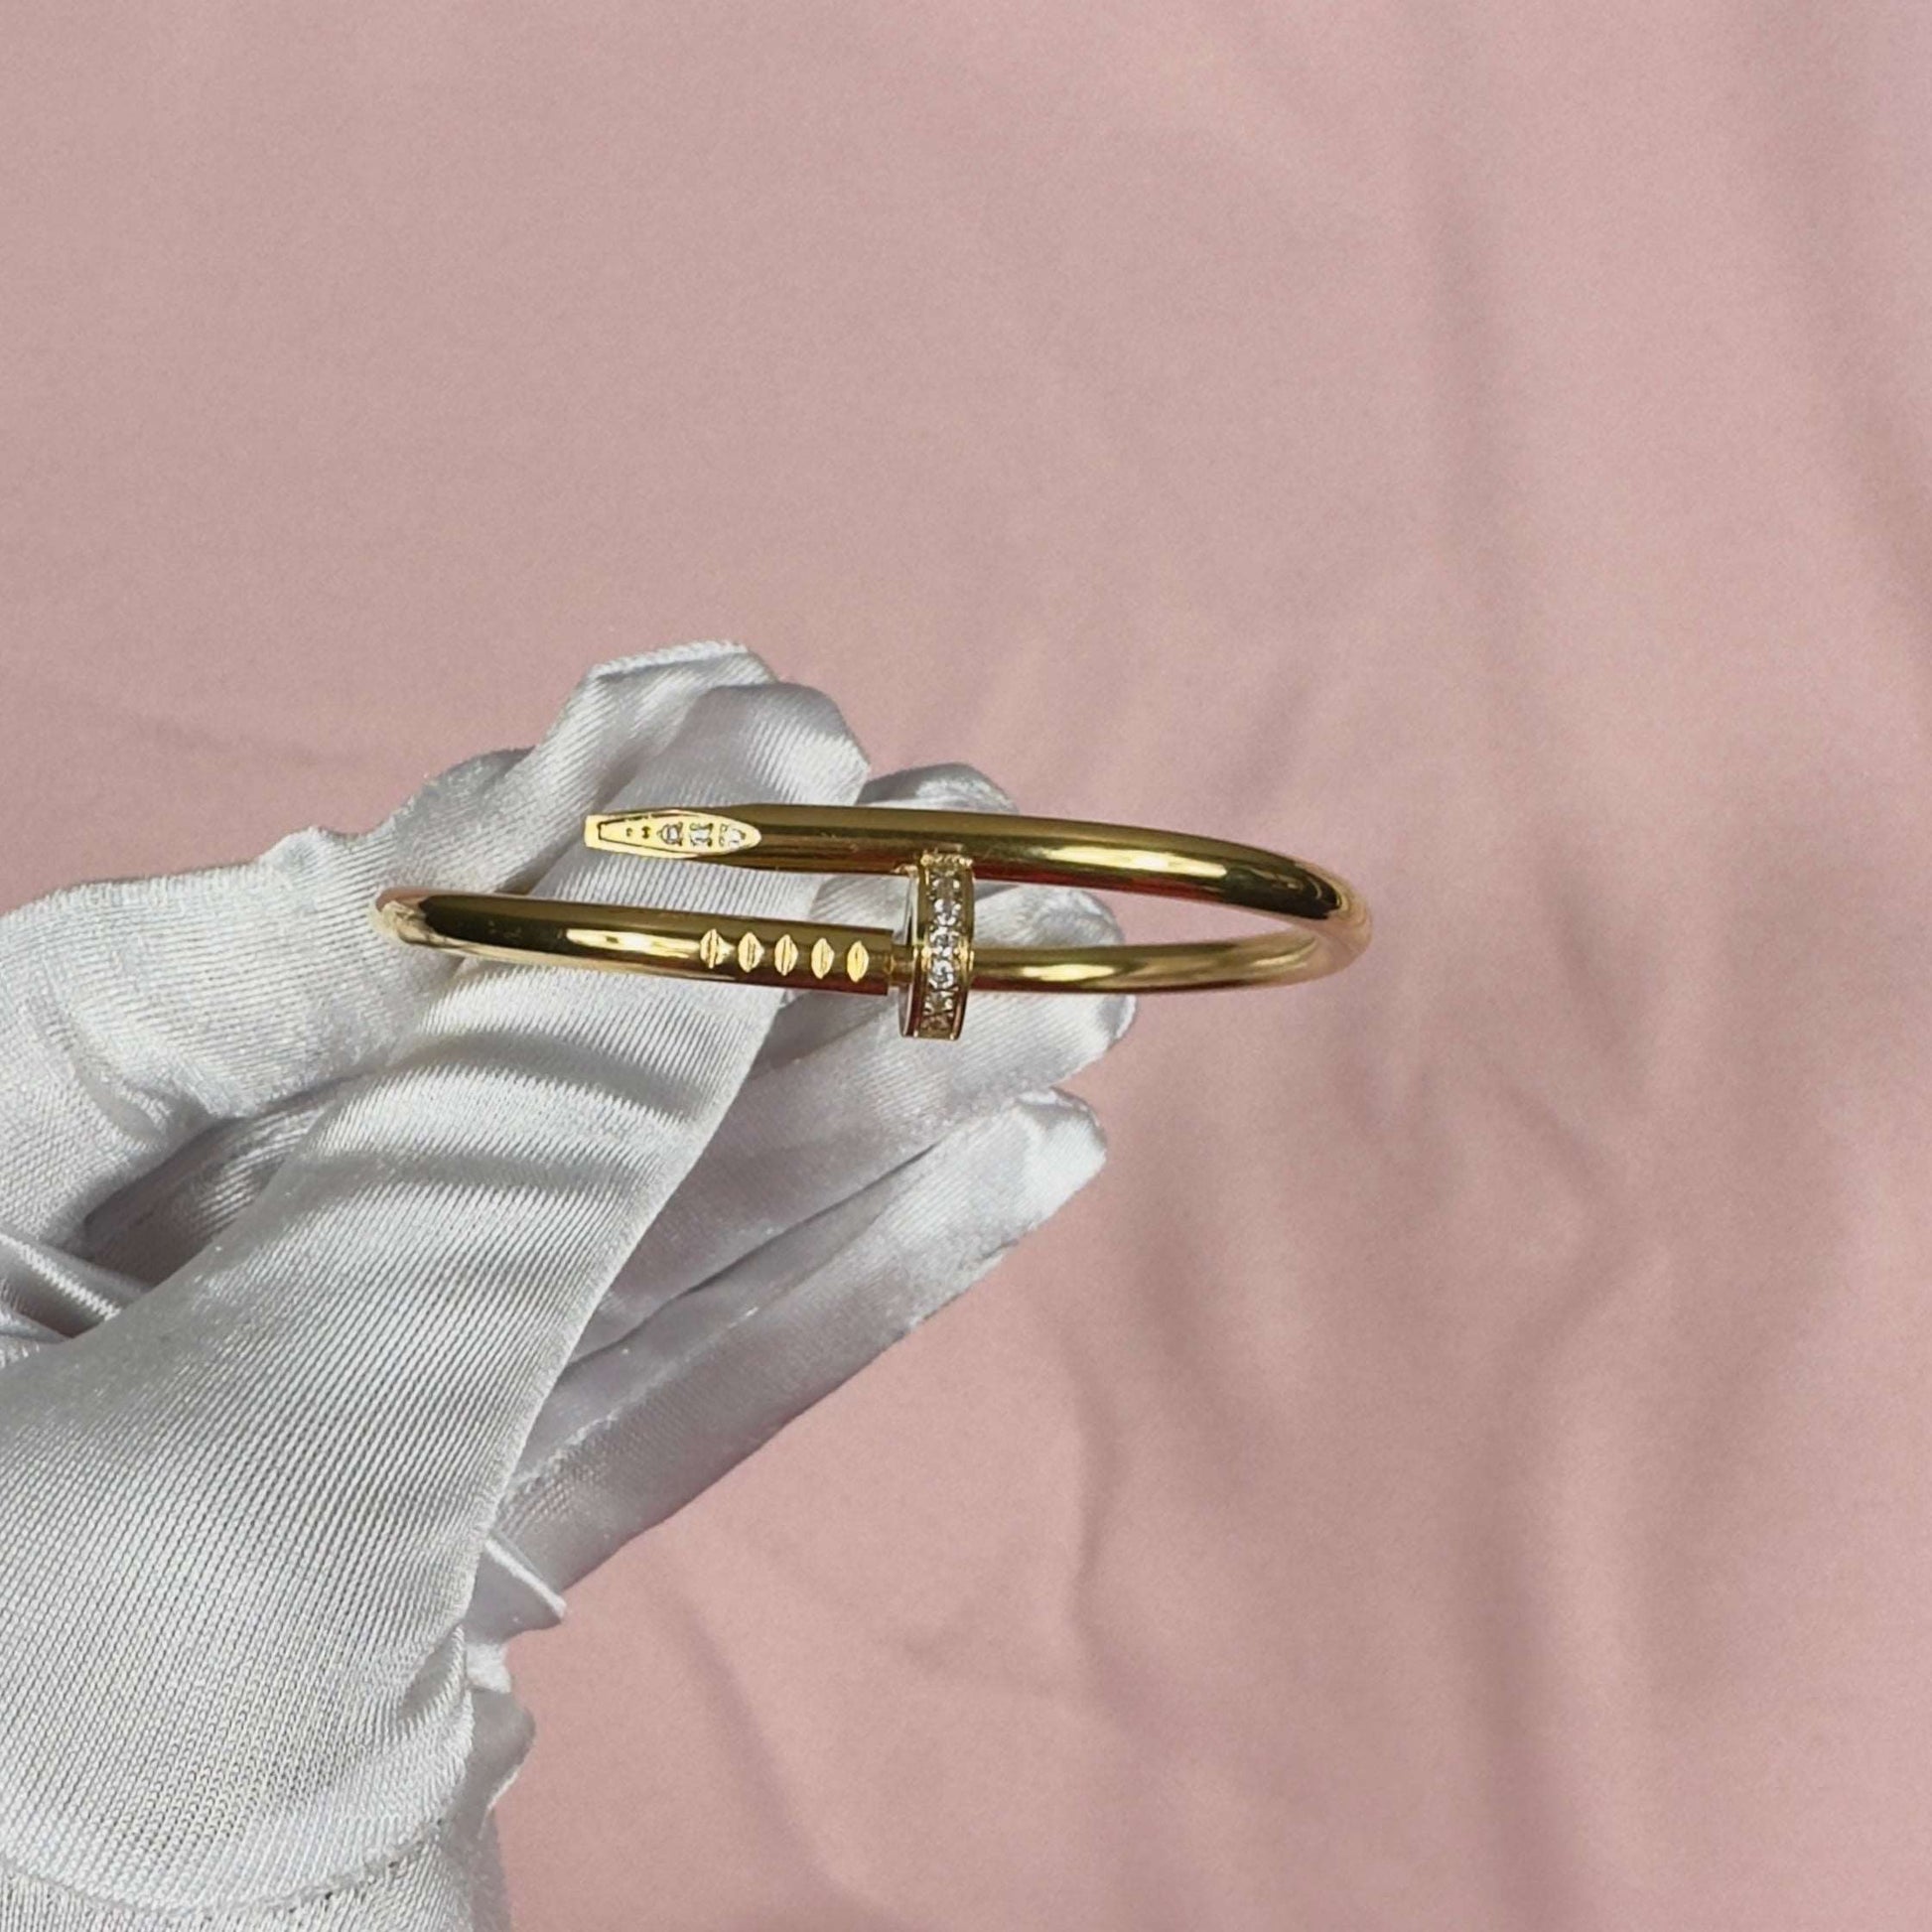 'Cara' - 18k Gold Plated Stainless Steel Partly Embellished Bangle